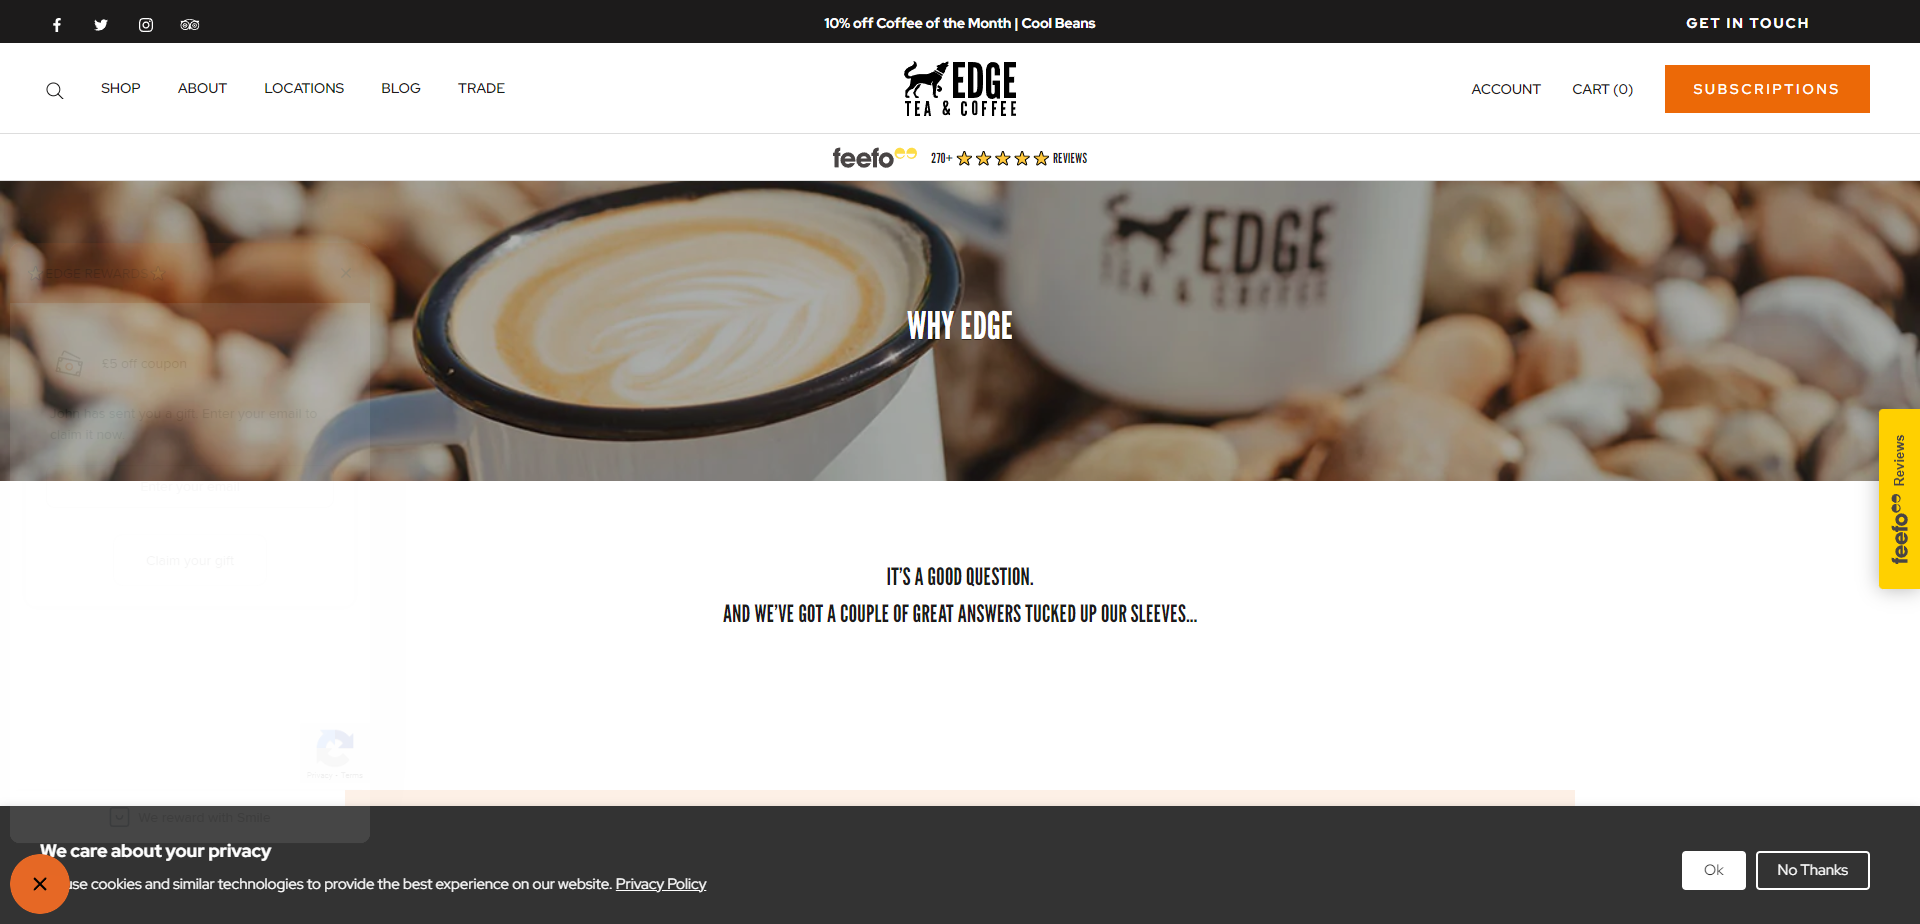 Referral Landing Page for Edge Tea and Coffee